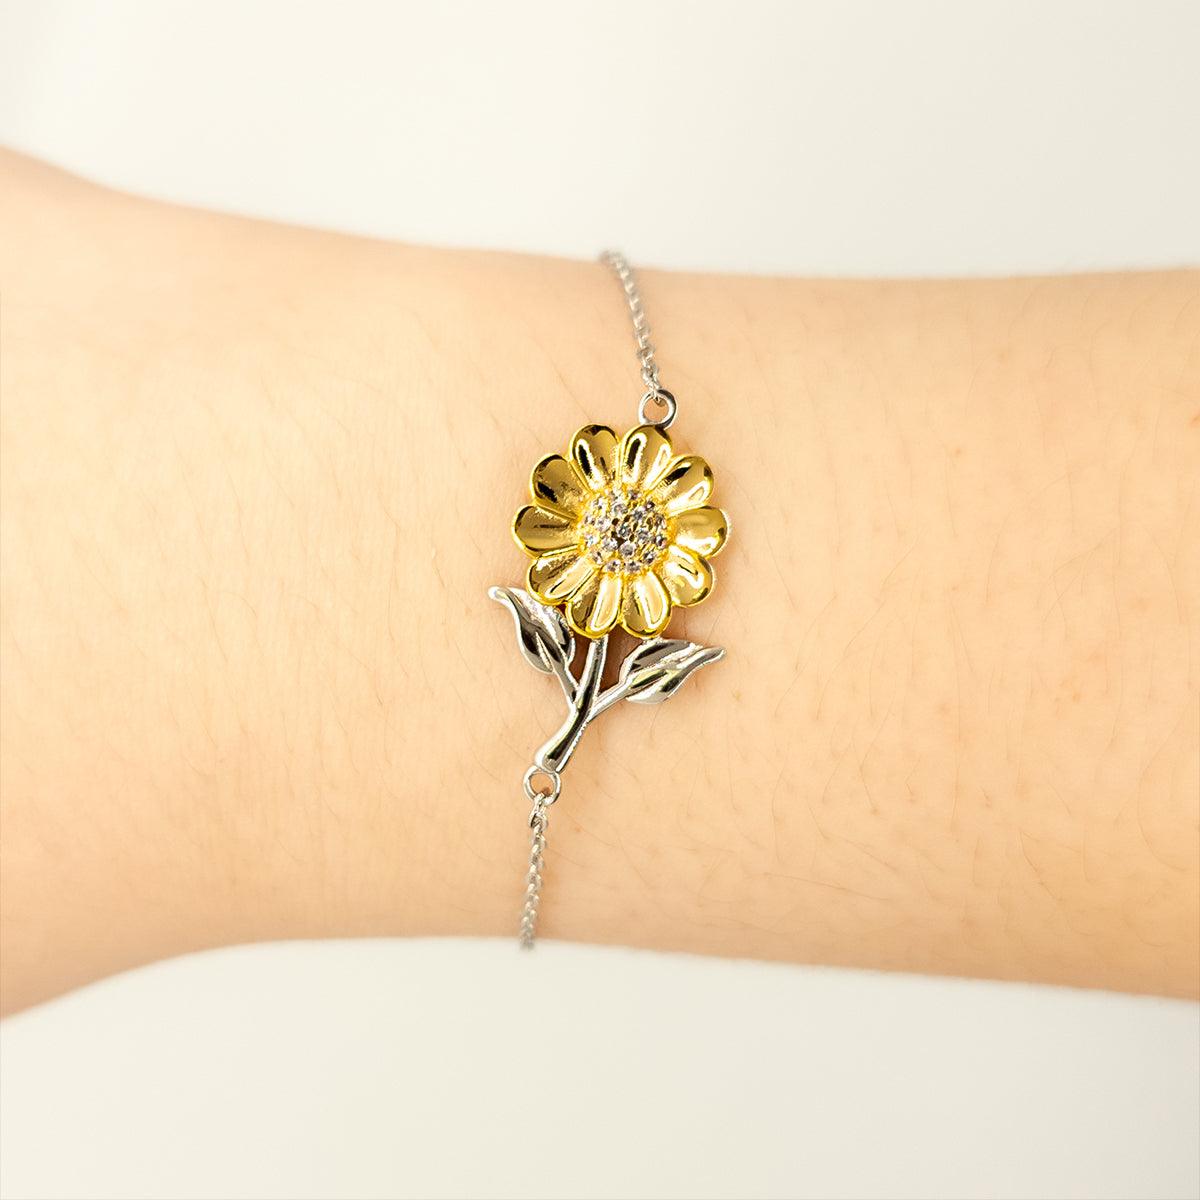 Aeronautical Engineer Sunflower Bracelet - Thanks for being who you are - Birthday Christmas Jewelry Gifts Coworkers Colleague Boss - Mallard Moon Gift Shop